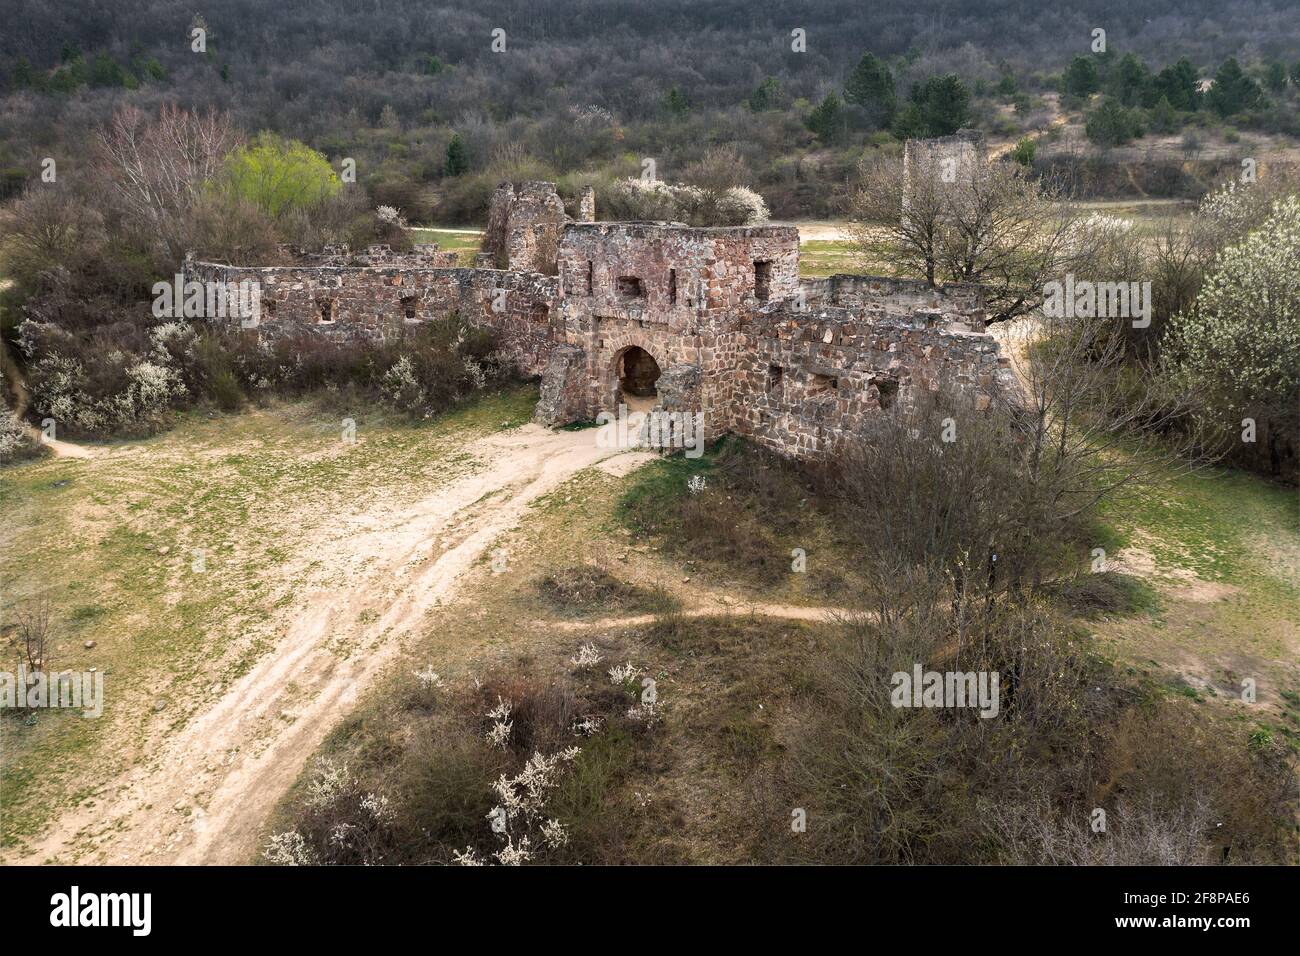 this ruins are the Castle of Eger copy. Made for the historical Hungarian  movie filming. The movie is the siegle of Eger castle Stock Photo - Alamy